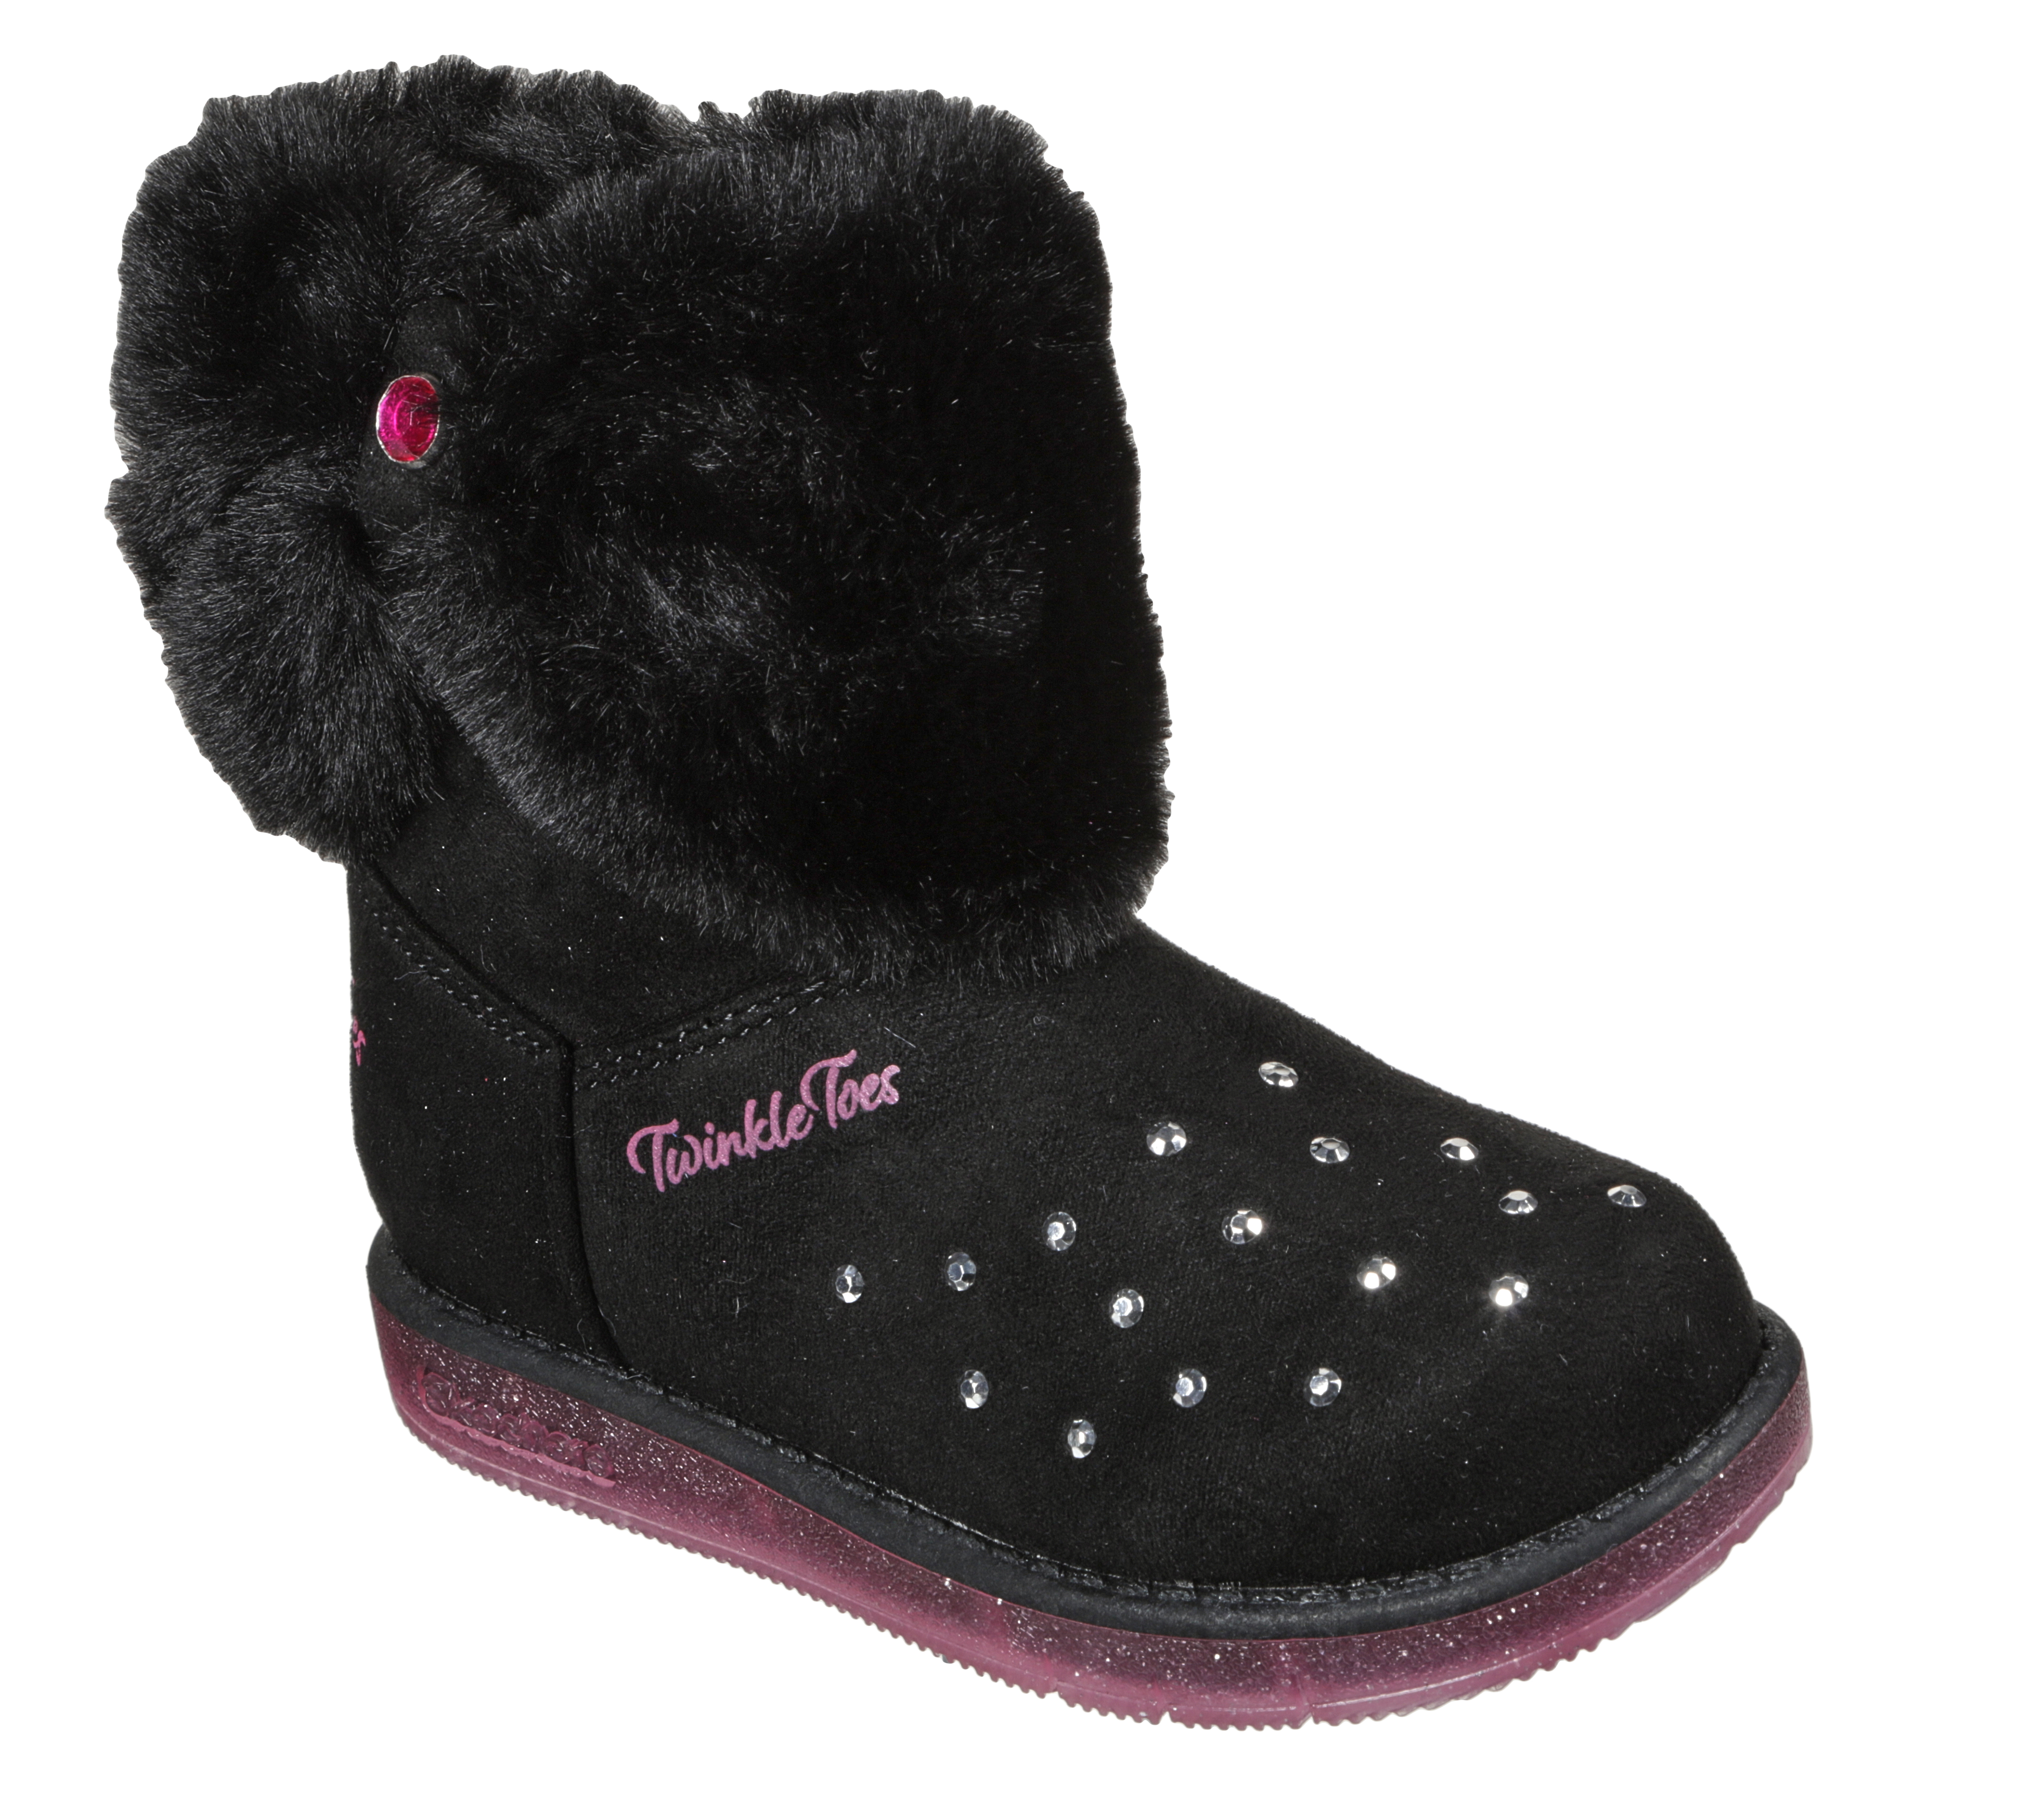 Desmenuzar Anual Aniquilar Twinkle Toes: Glitzy Glam - Cozy Cuddlers | SKECHERS PT